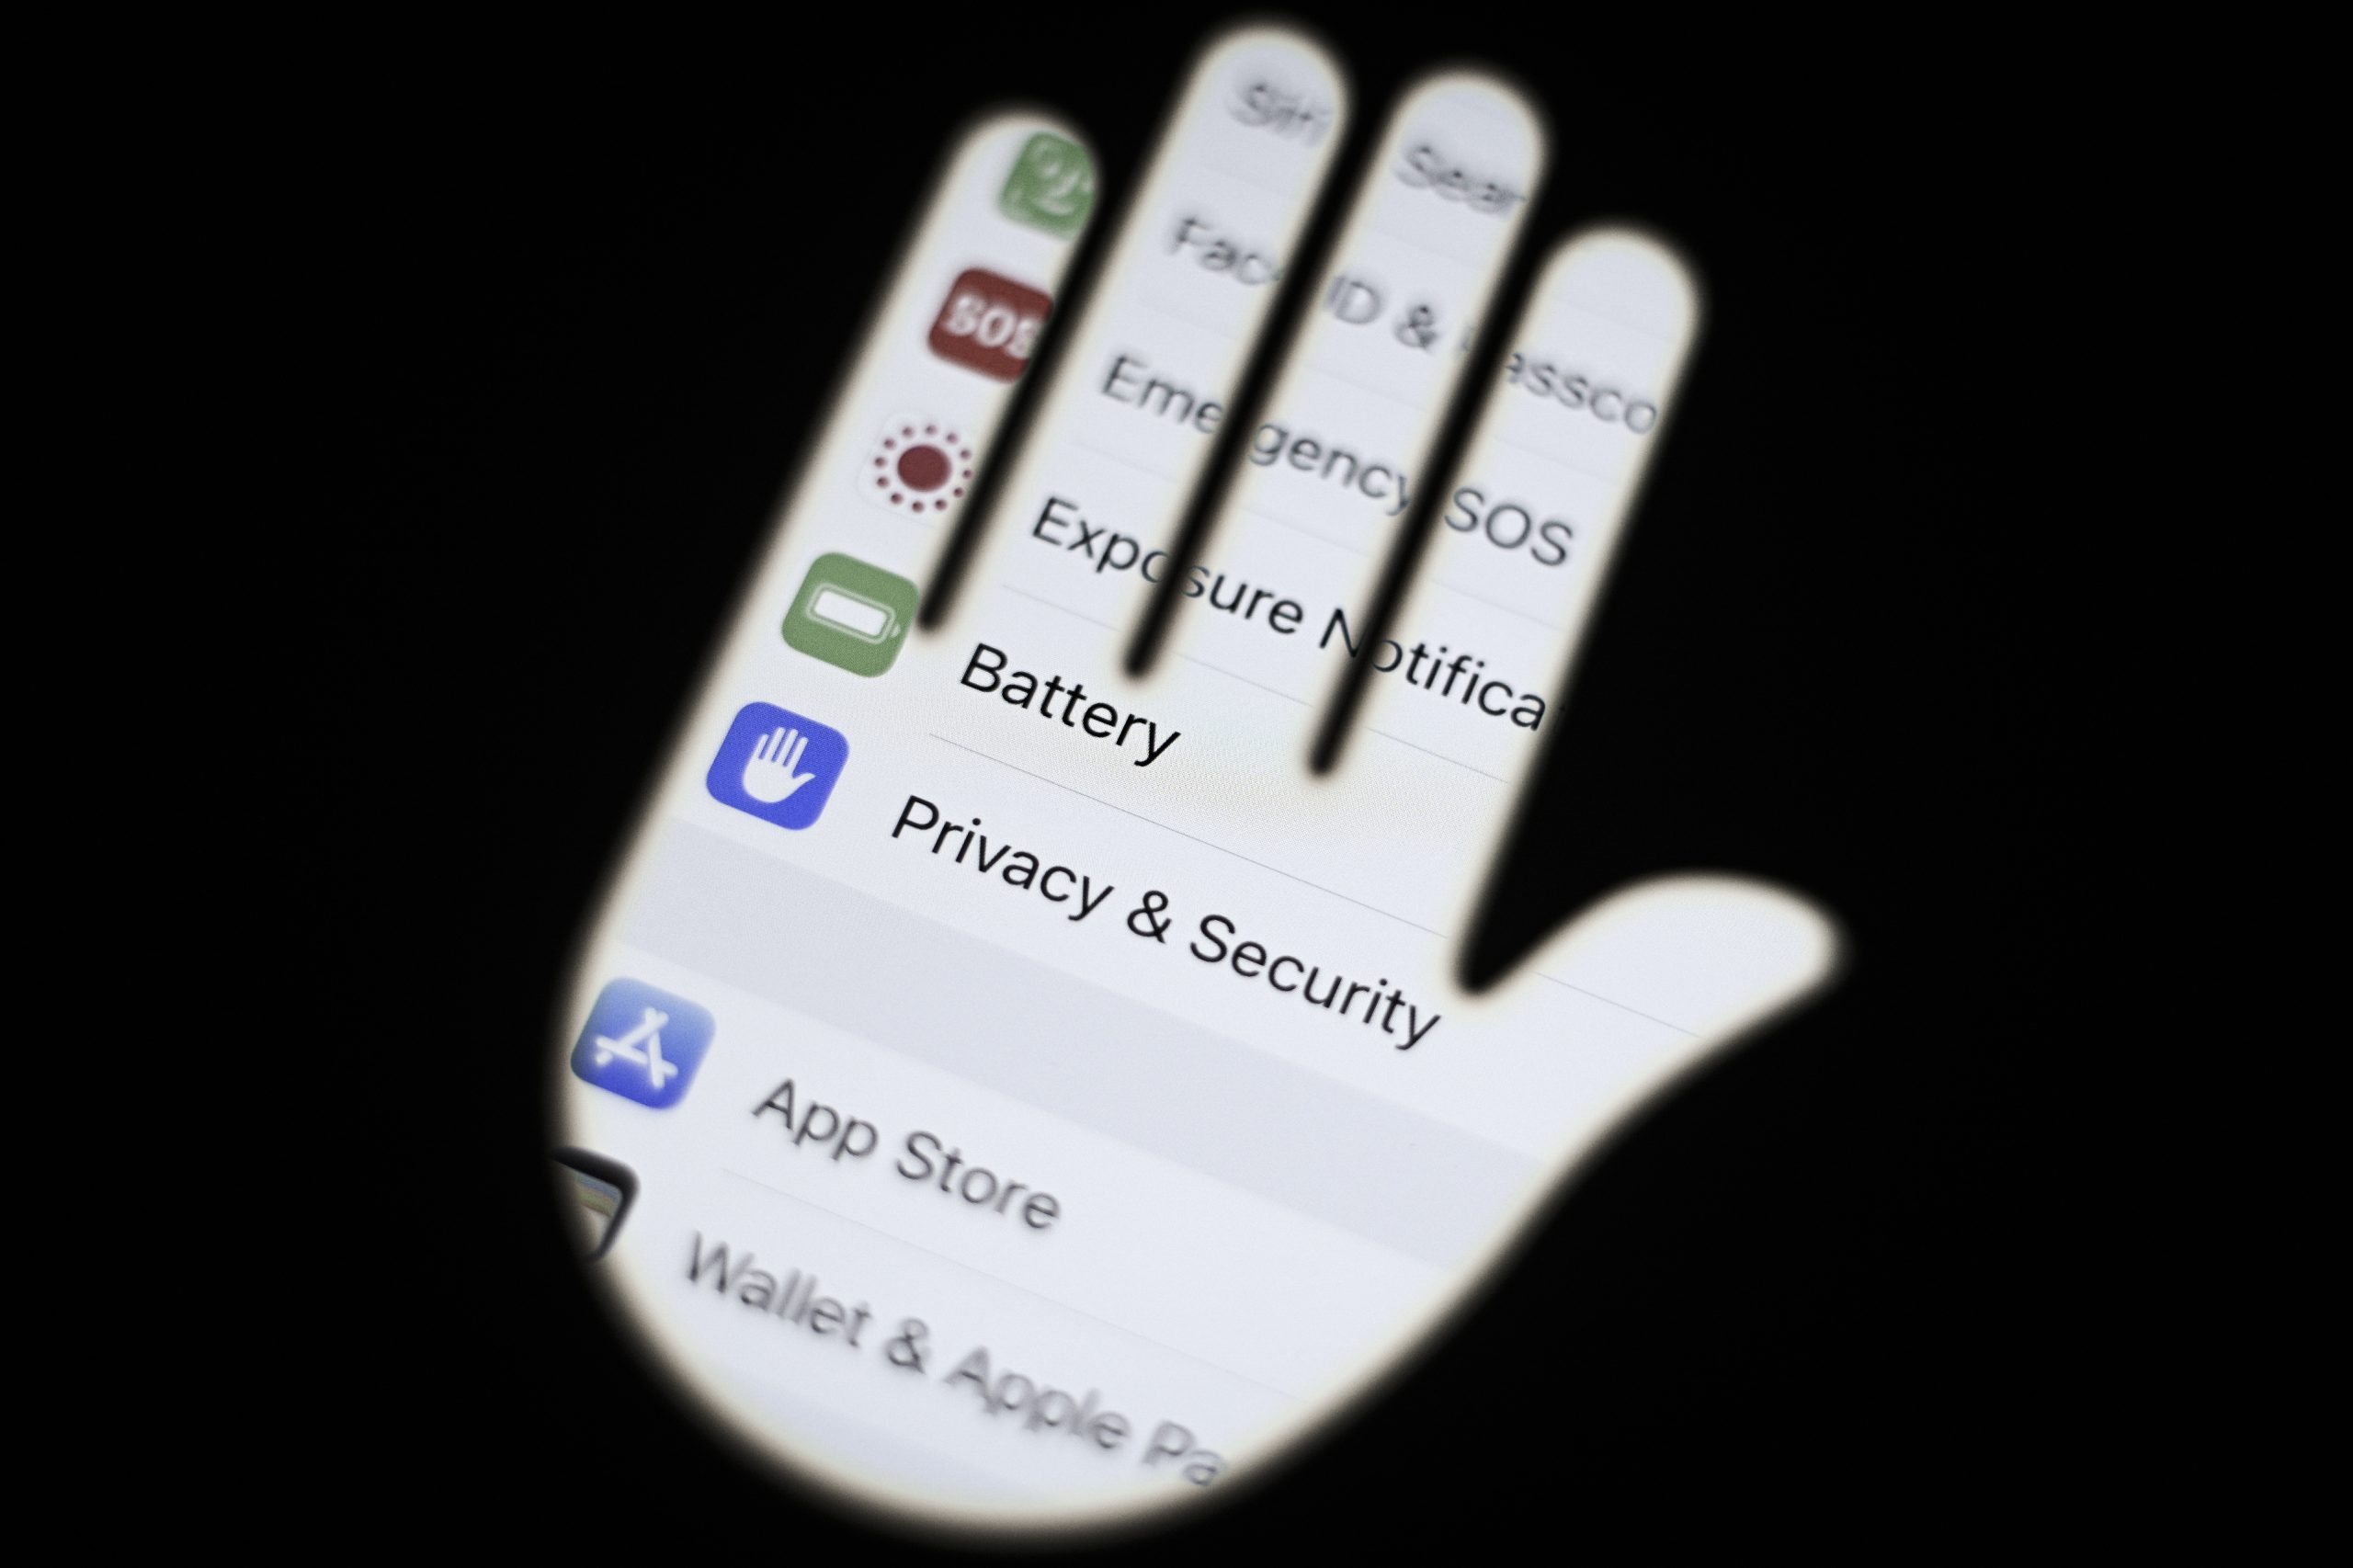 Photo: An iPhone with privacy and security settings is seen in this photo illustration in Warsaw, Poland on 05 January, 2022. CNIL, the French data protection authority has fined Apple EUR 8 million for harvesting iPhone user's data for advertisement targeting without consent. Credit: Jaap Arriens/NurPhoto